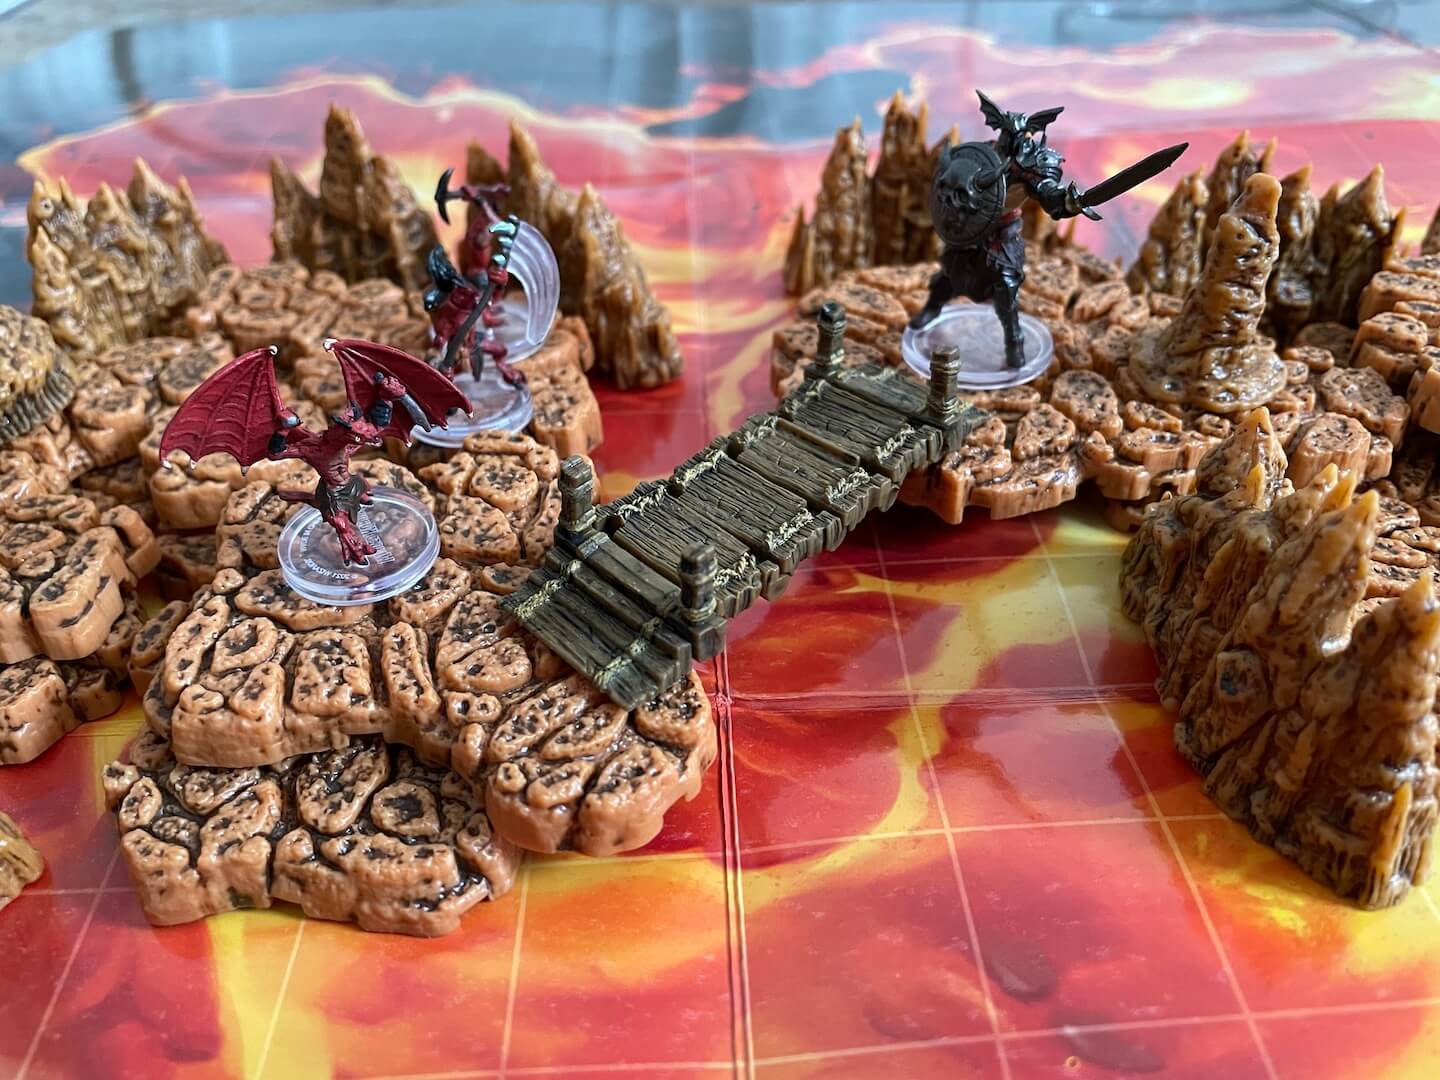 Our valiant fighter stares down a Kobold in a molten cavern created with WizKids WarLock Dungeon Tiles.